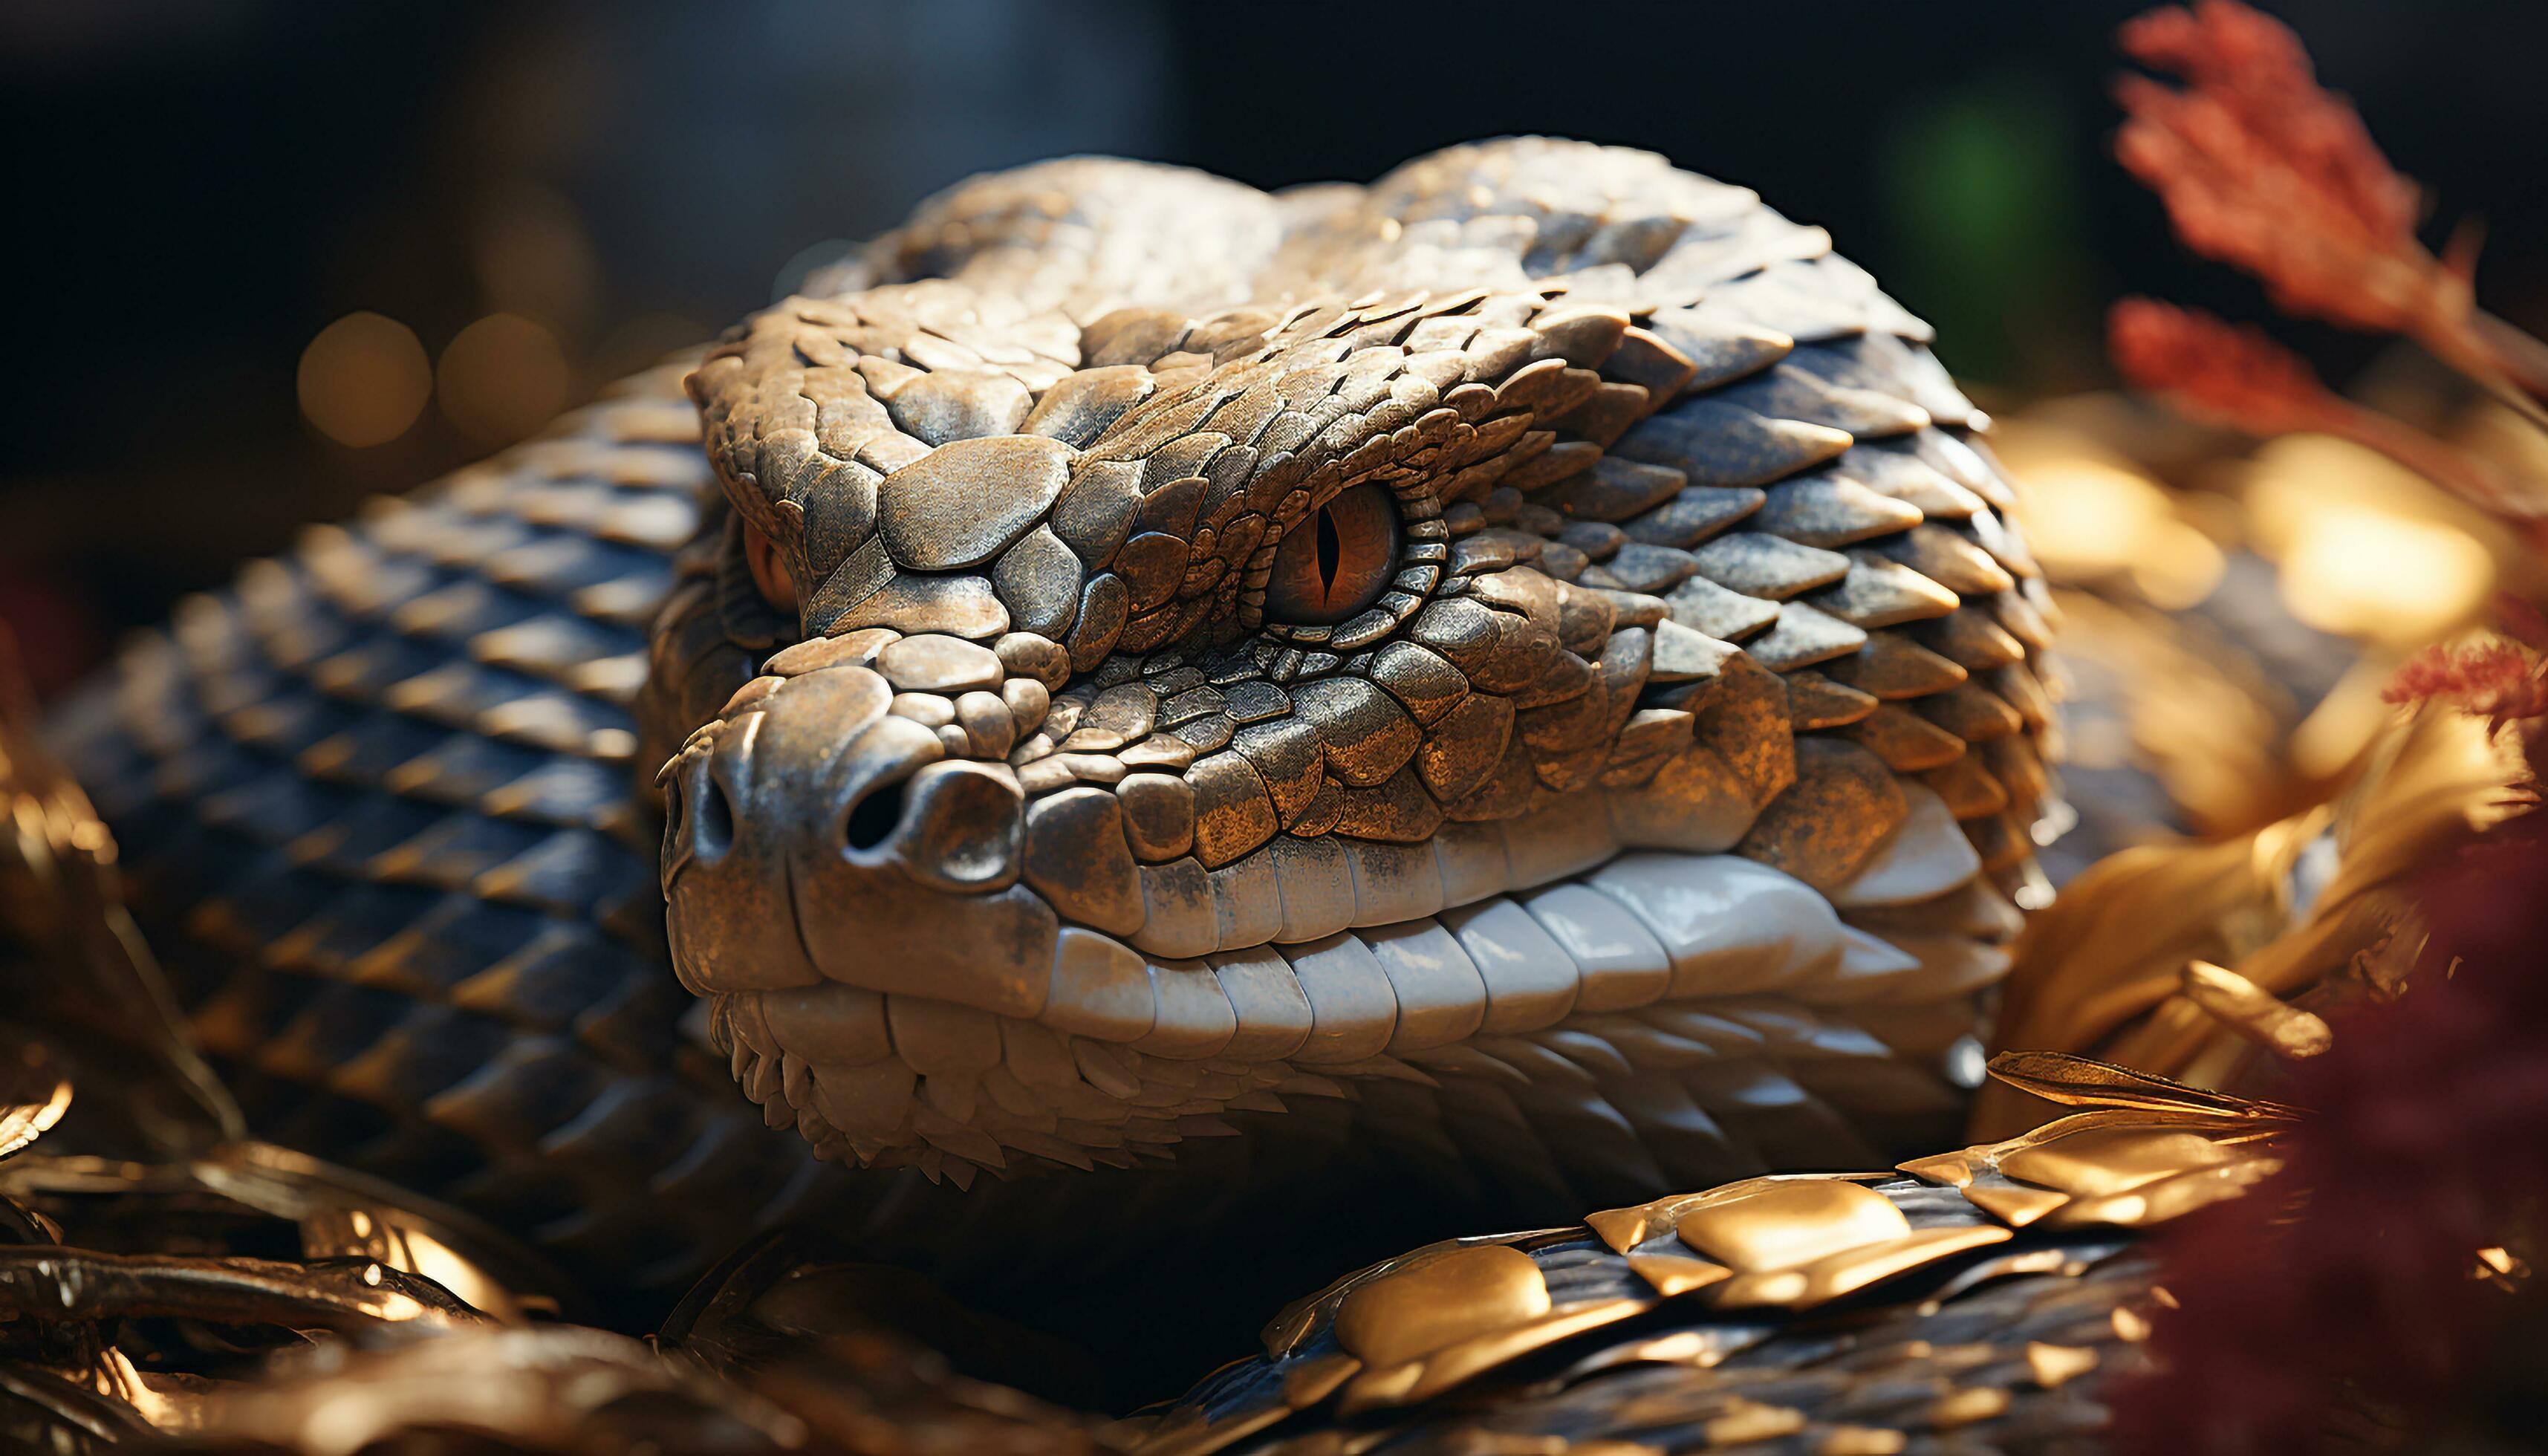 https://static.vecteezy.com/system/resources/previews/026/436/533/large_2x/snake-in-nature-viper-dangerous-pattern-endangered-species-in-forest-generated-by-ai-free-photo.jpg